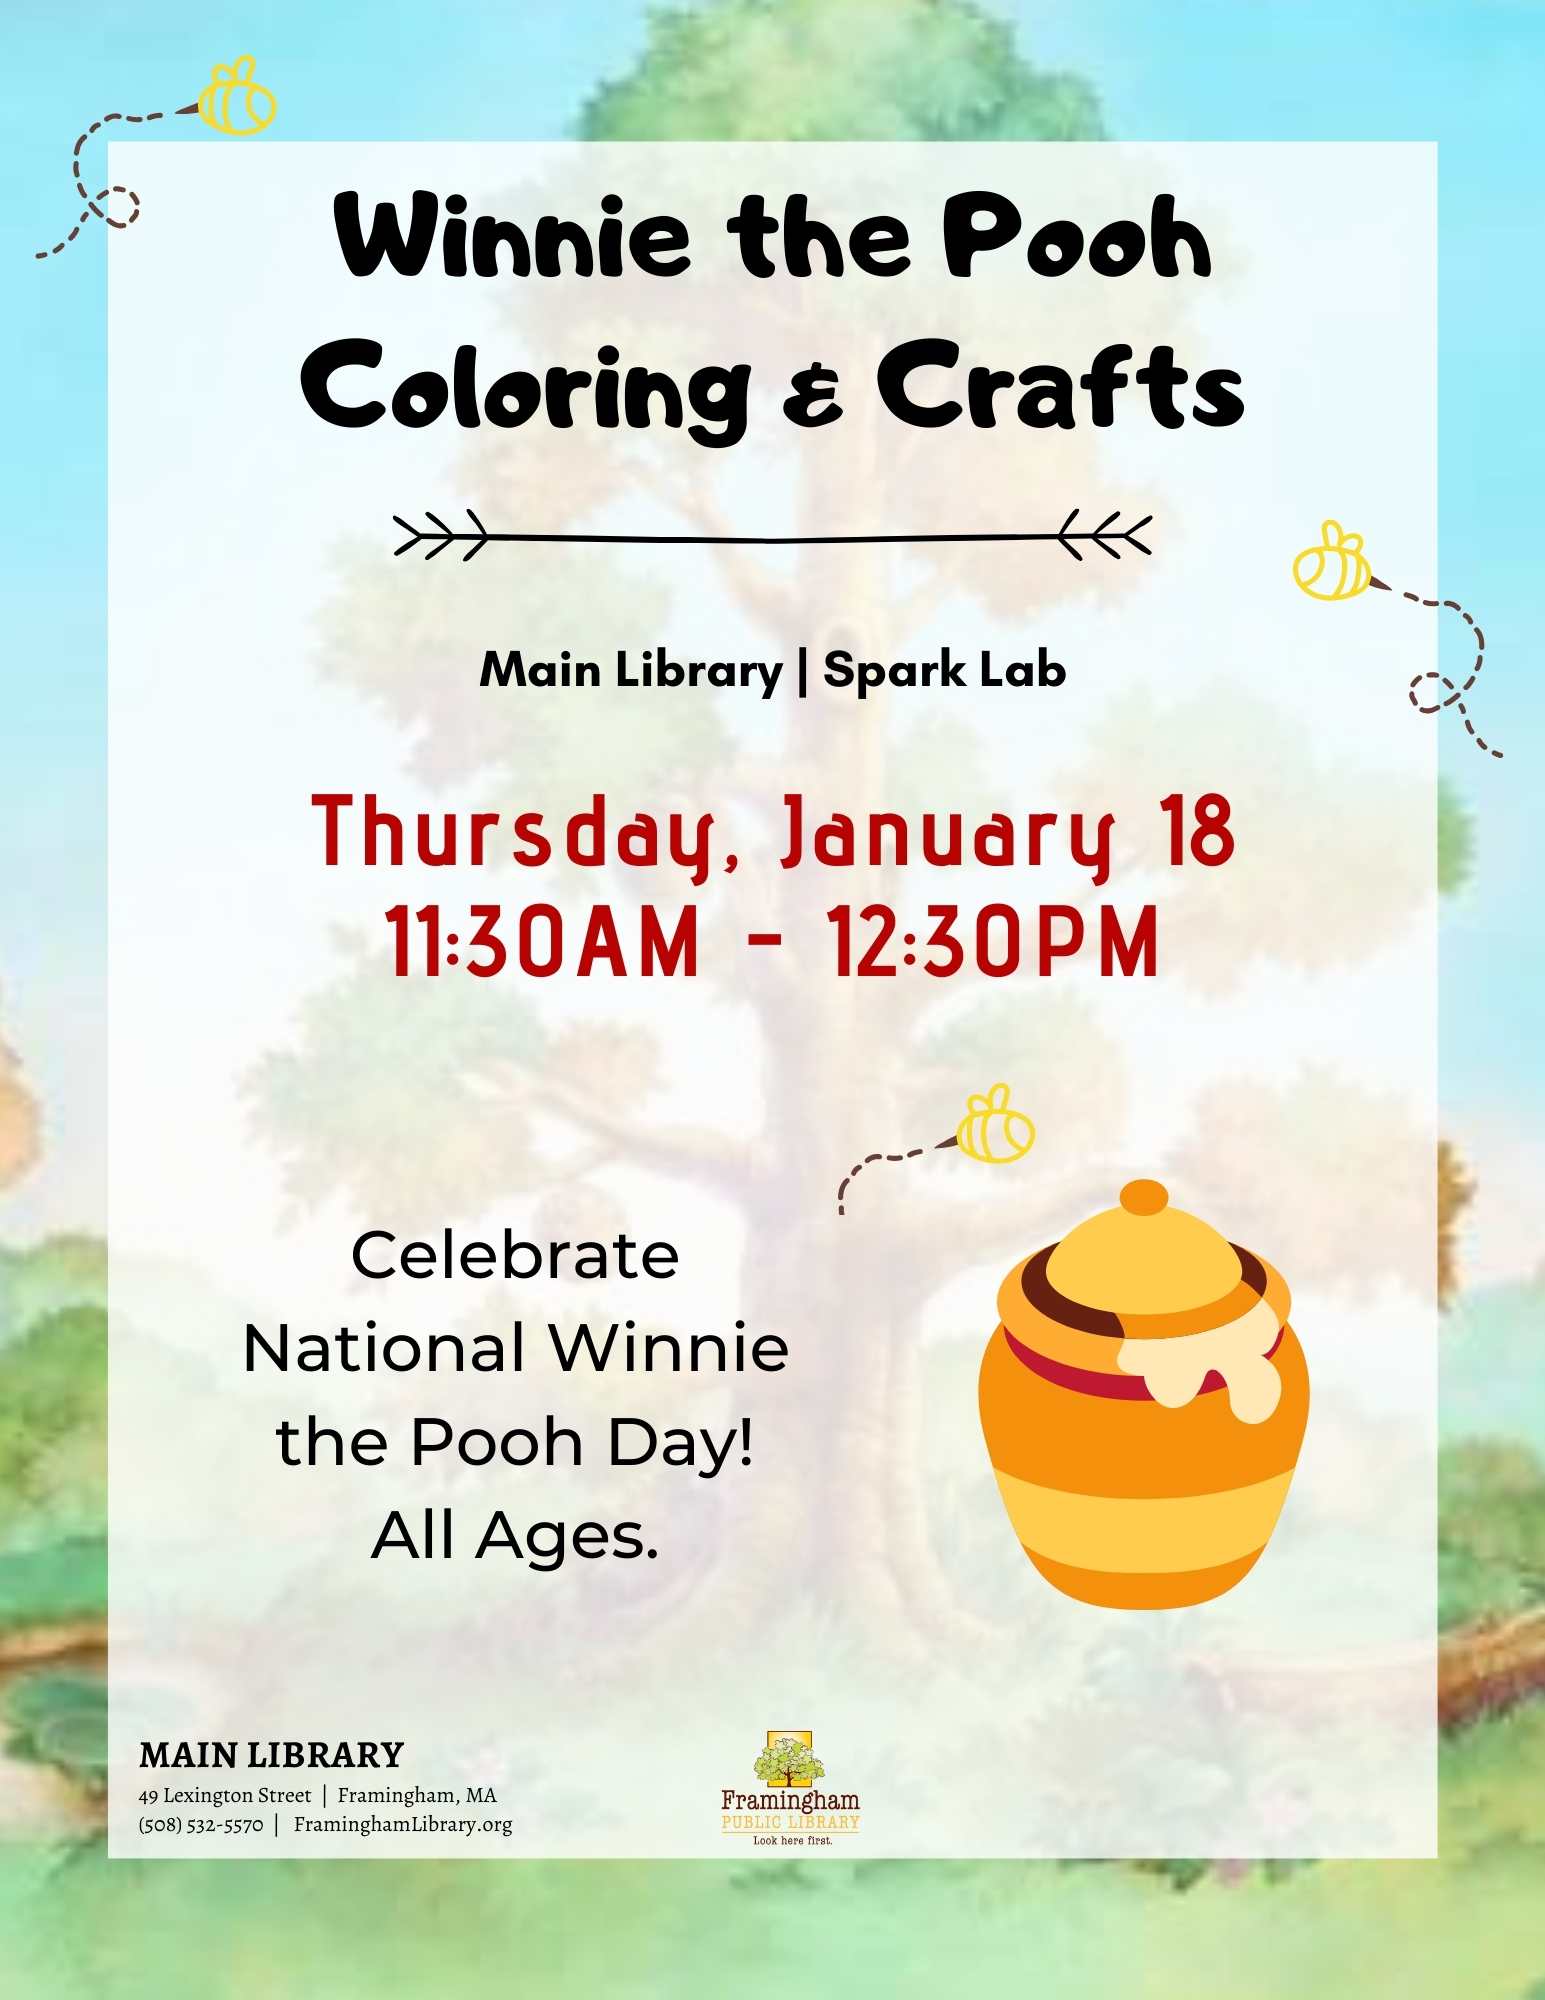 Winnie the Pooh Coloring & Crafts thumbnail Photo